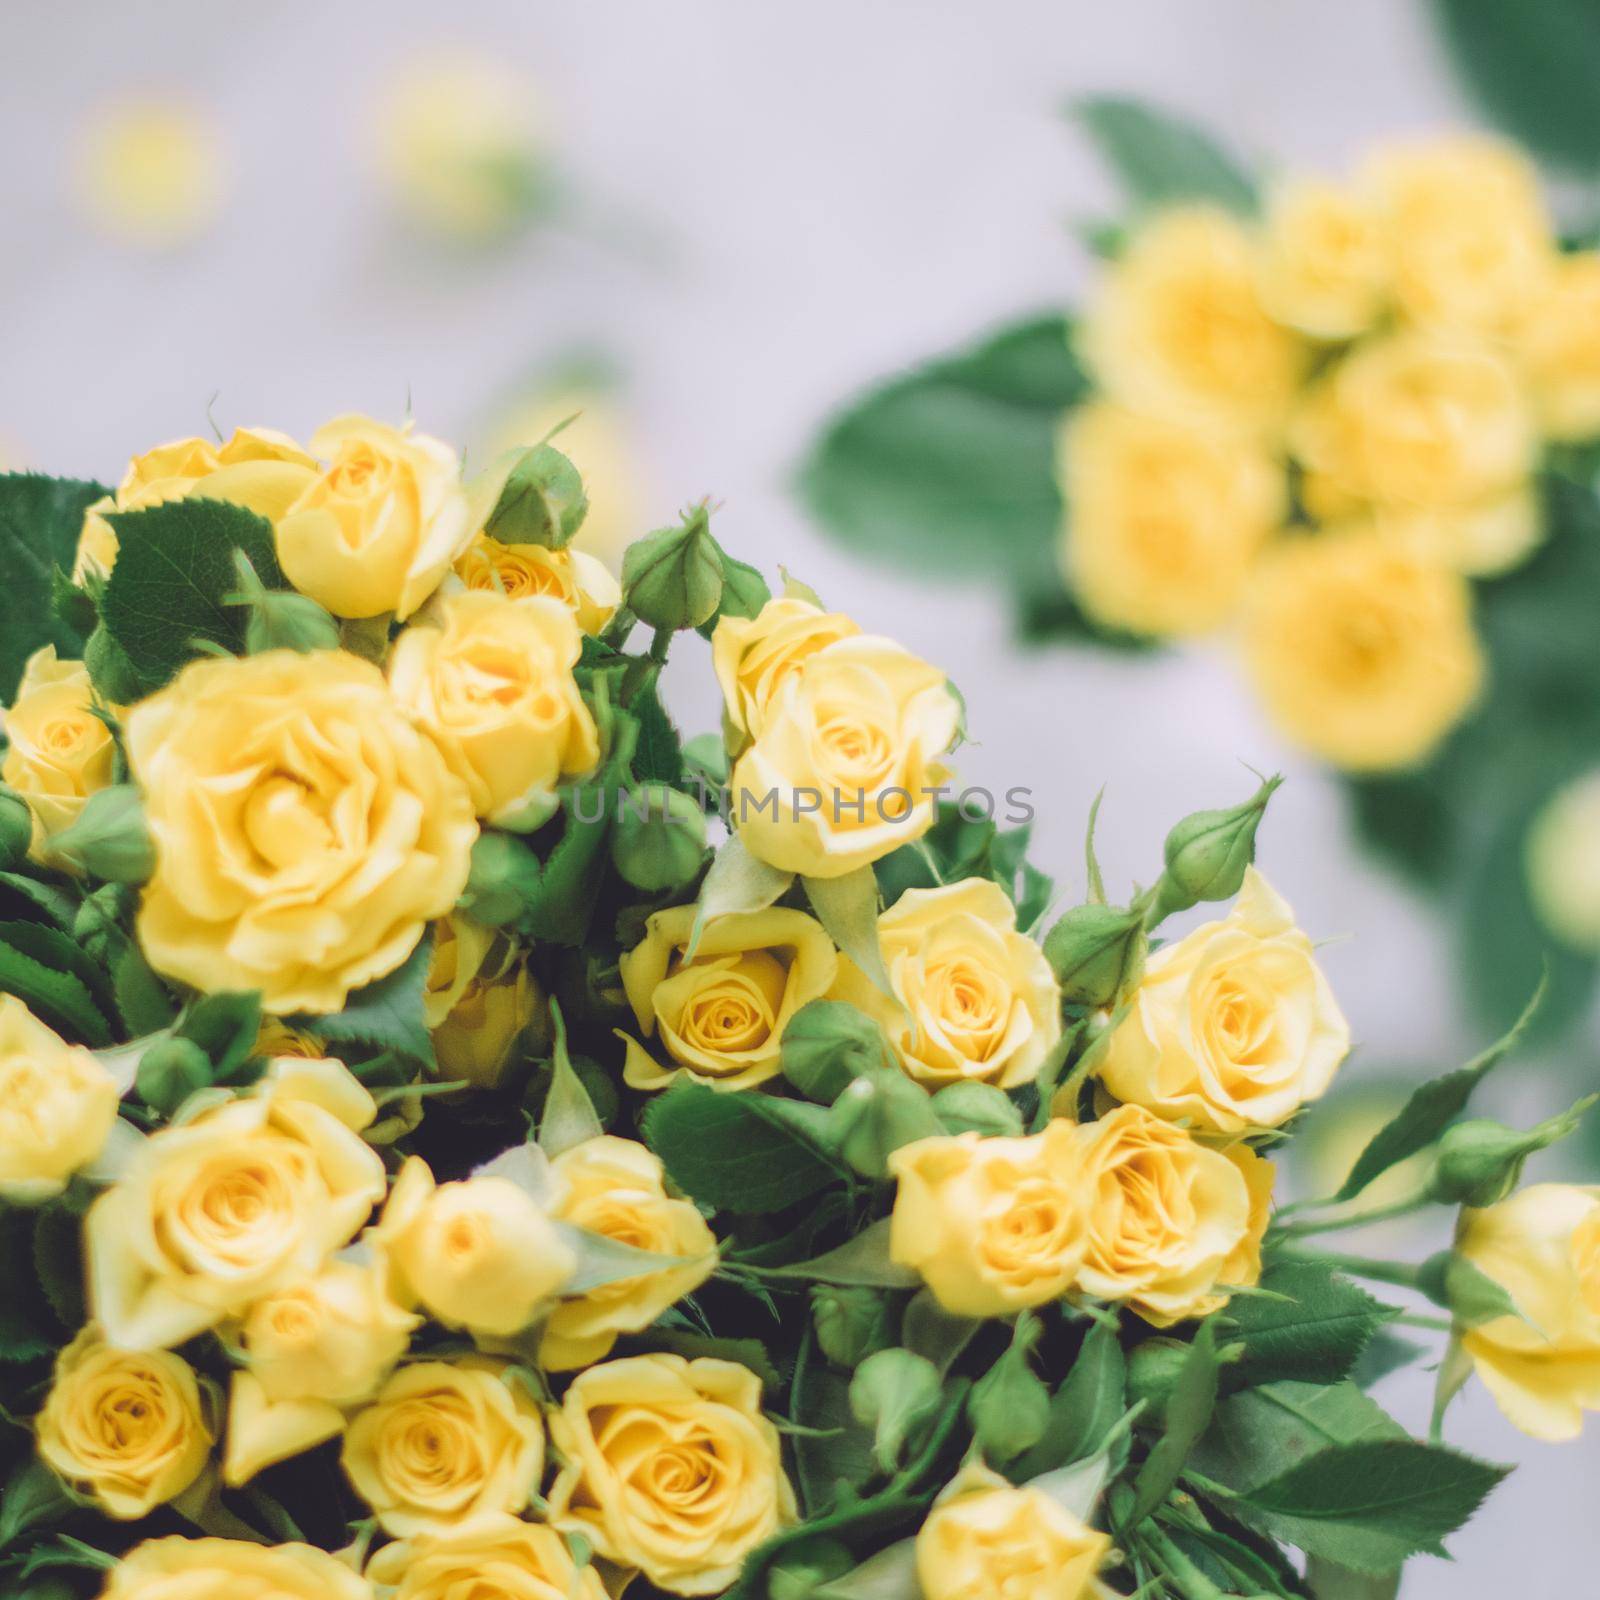 yellow roses - wedding, holiday and floral garden styled concept